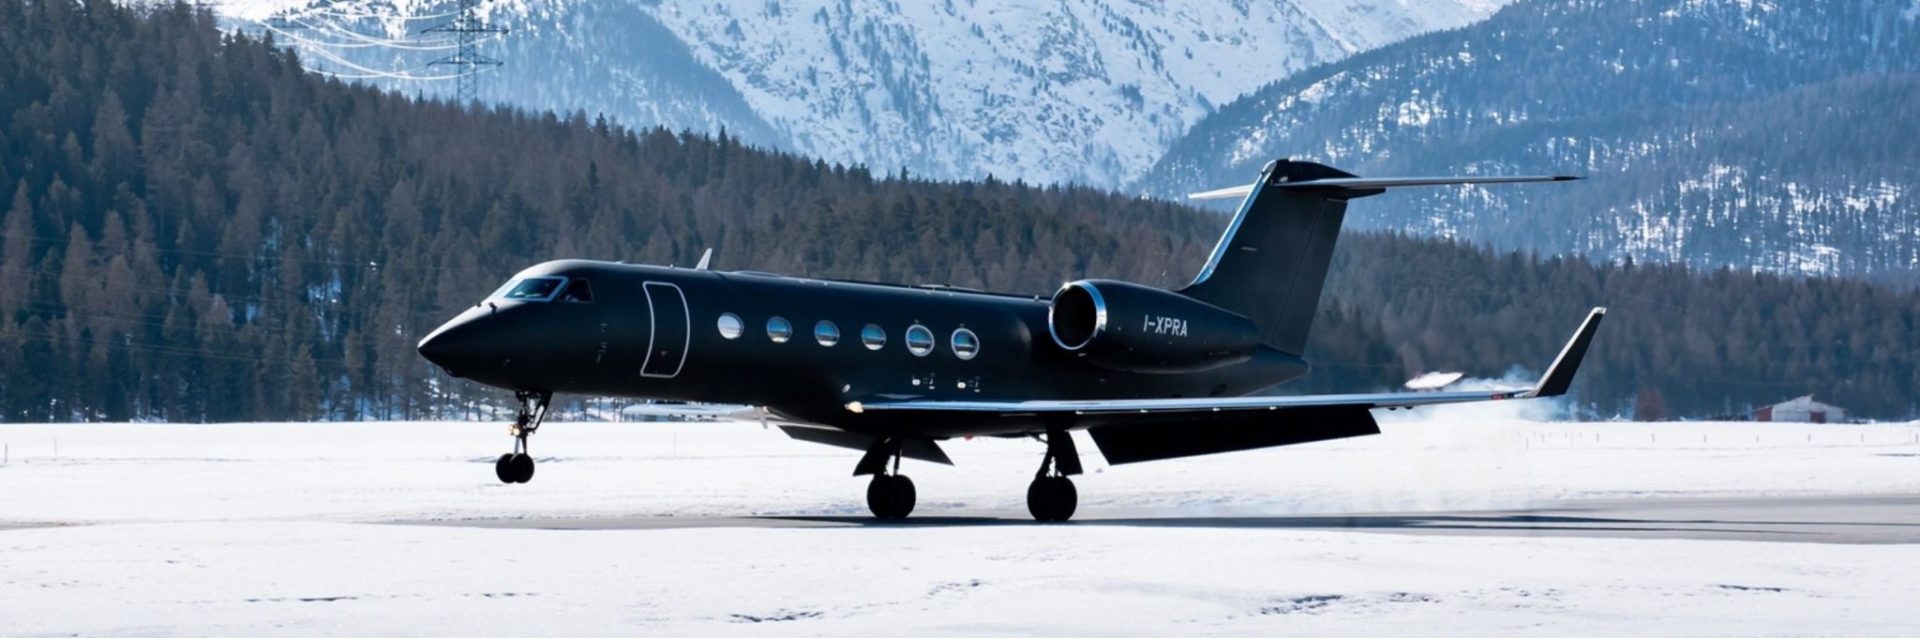 Unconventional private jets, part 1: black private jets - Avico